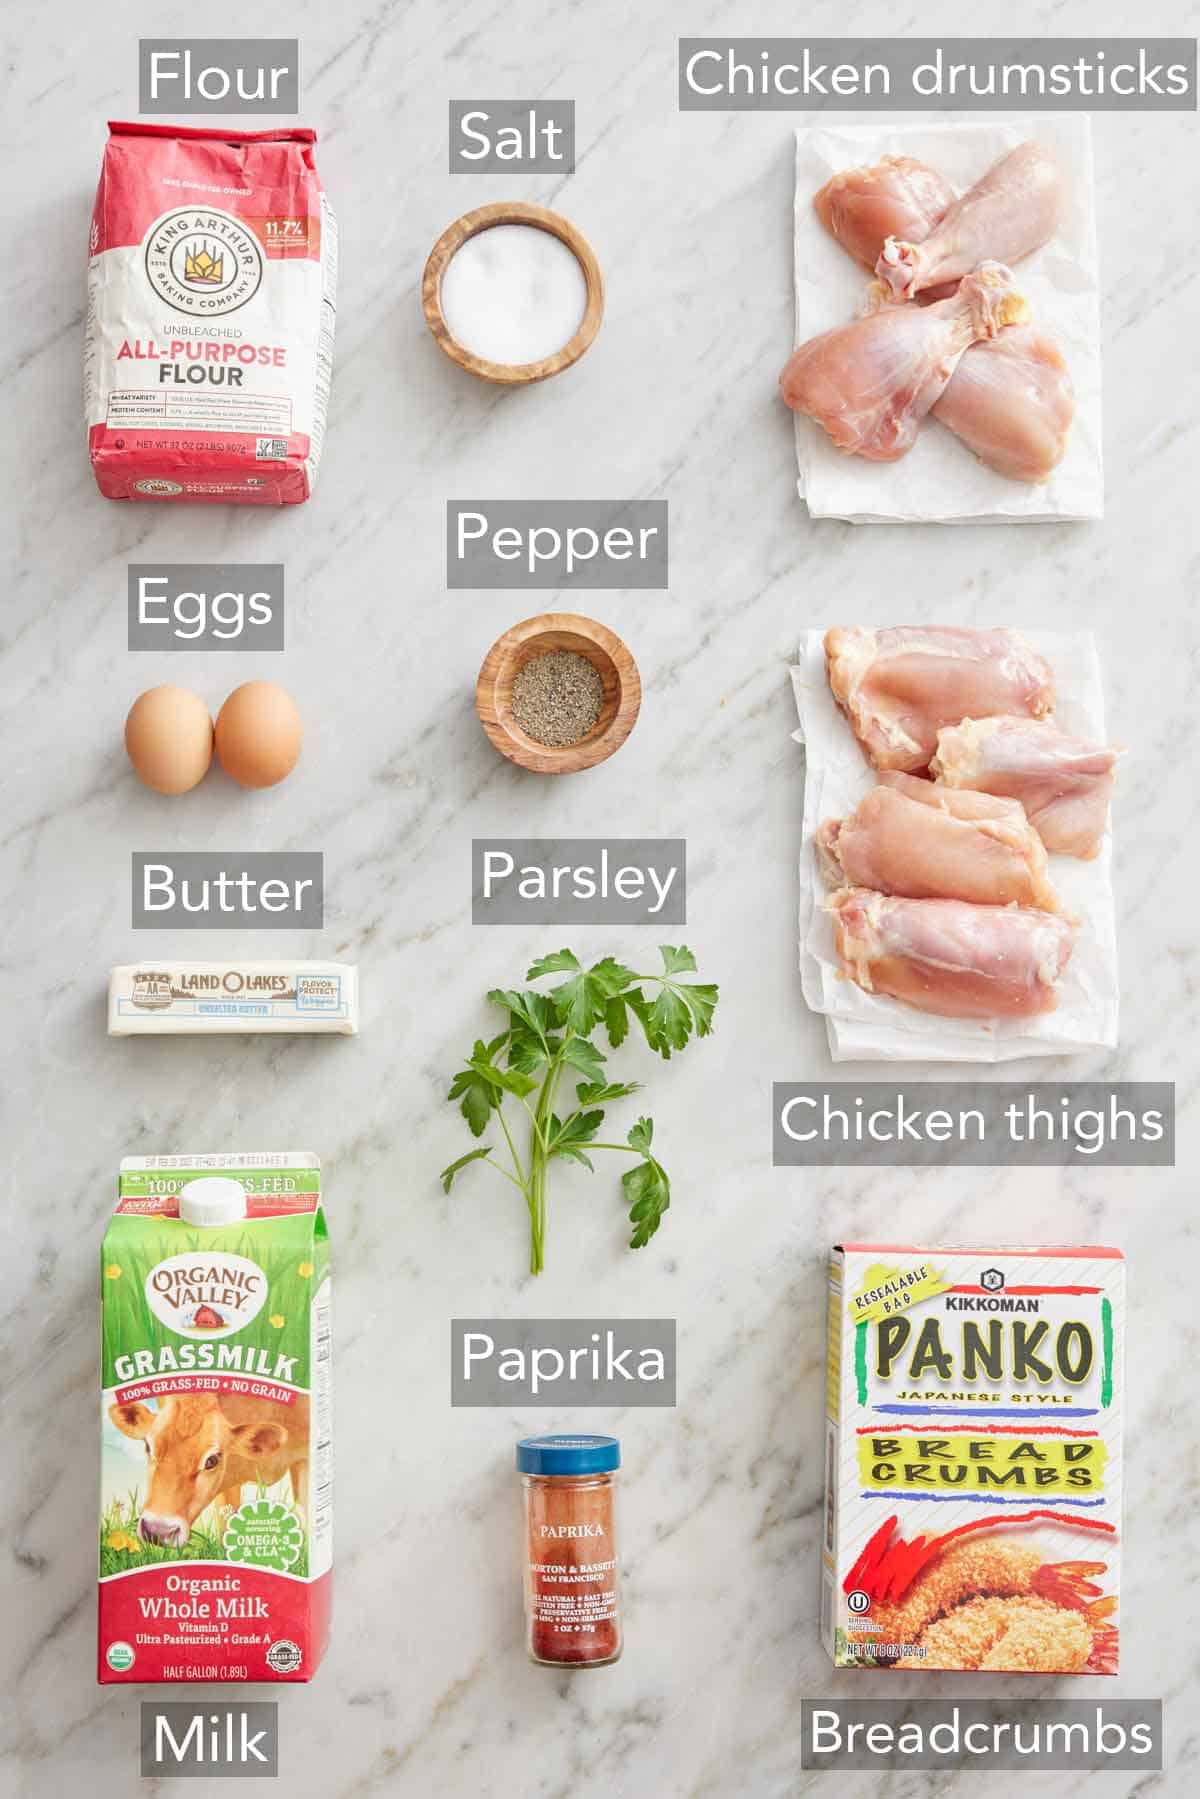 Ingredients needed to make oven fried chicken.